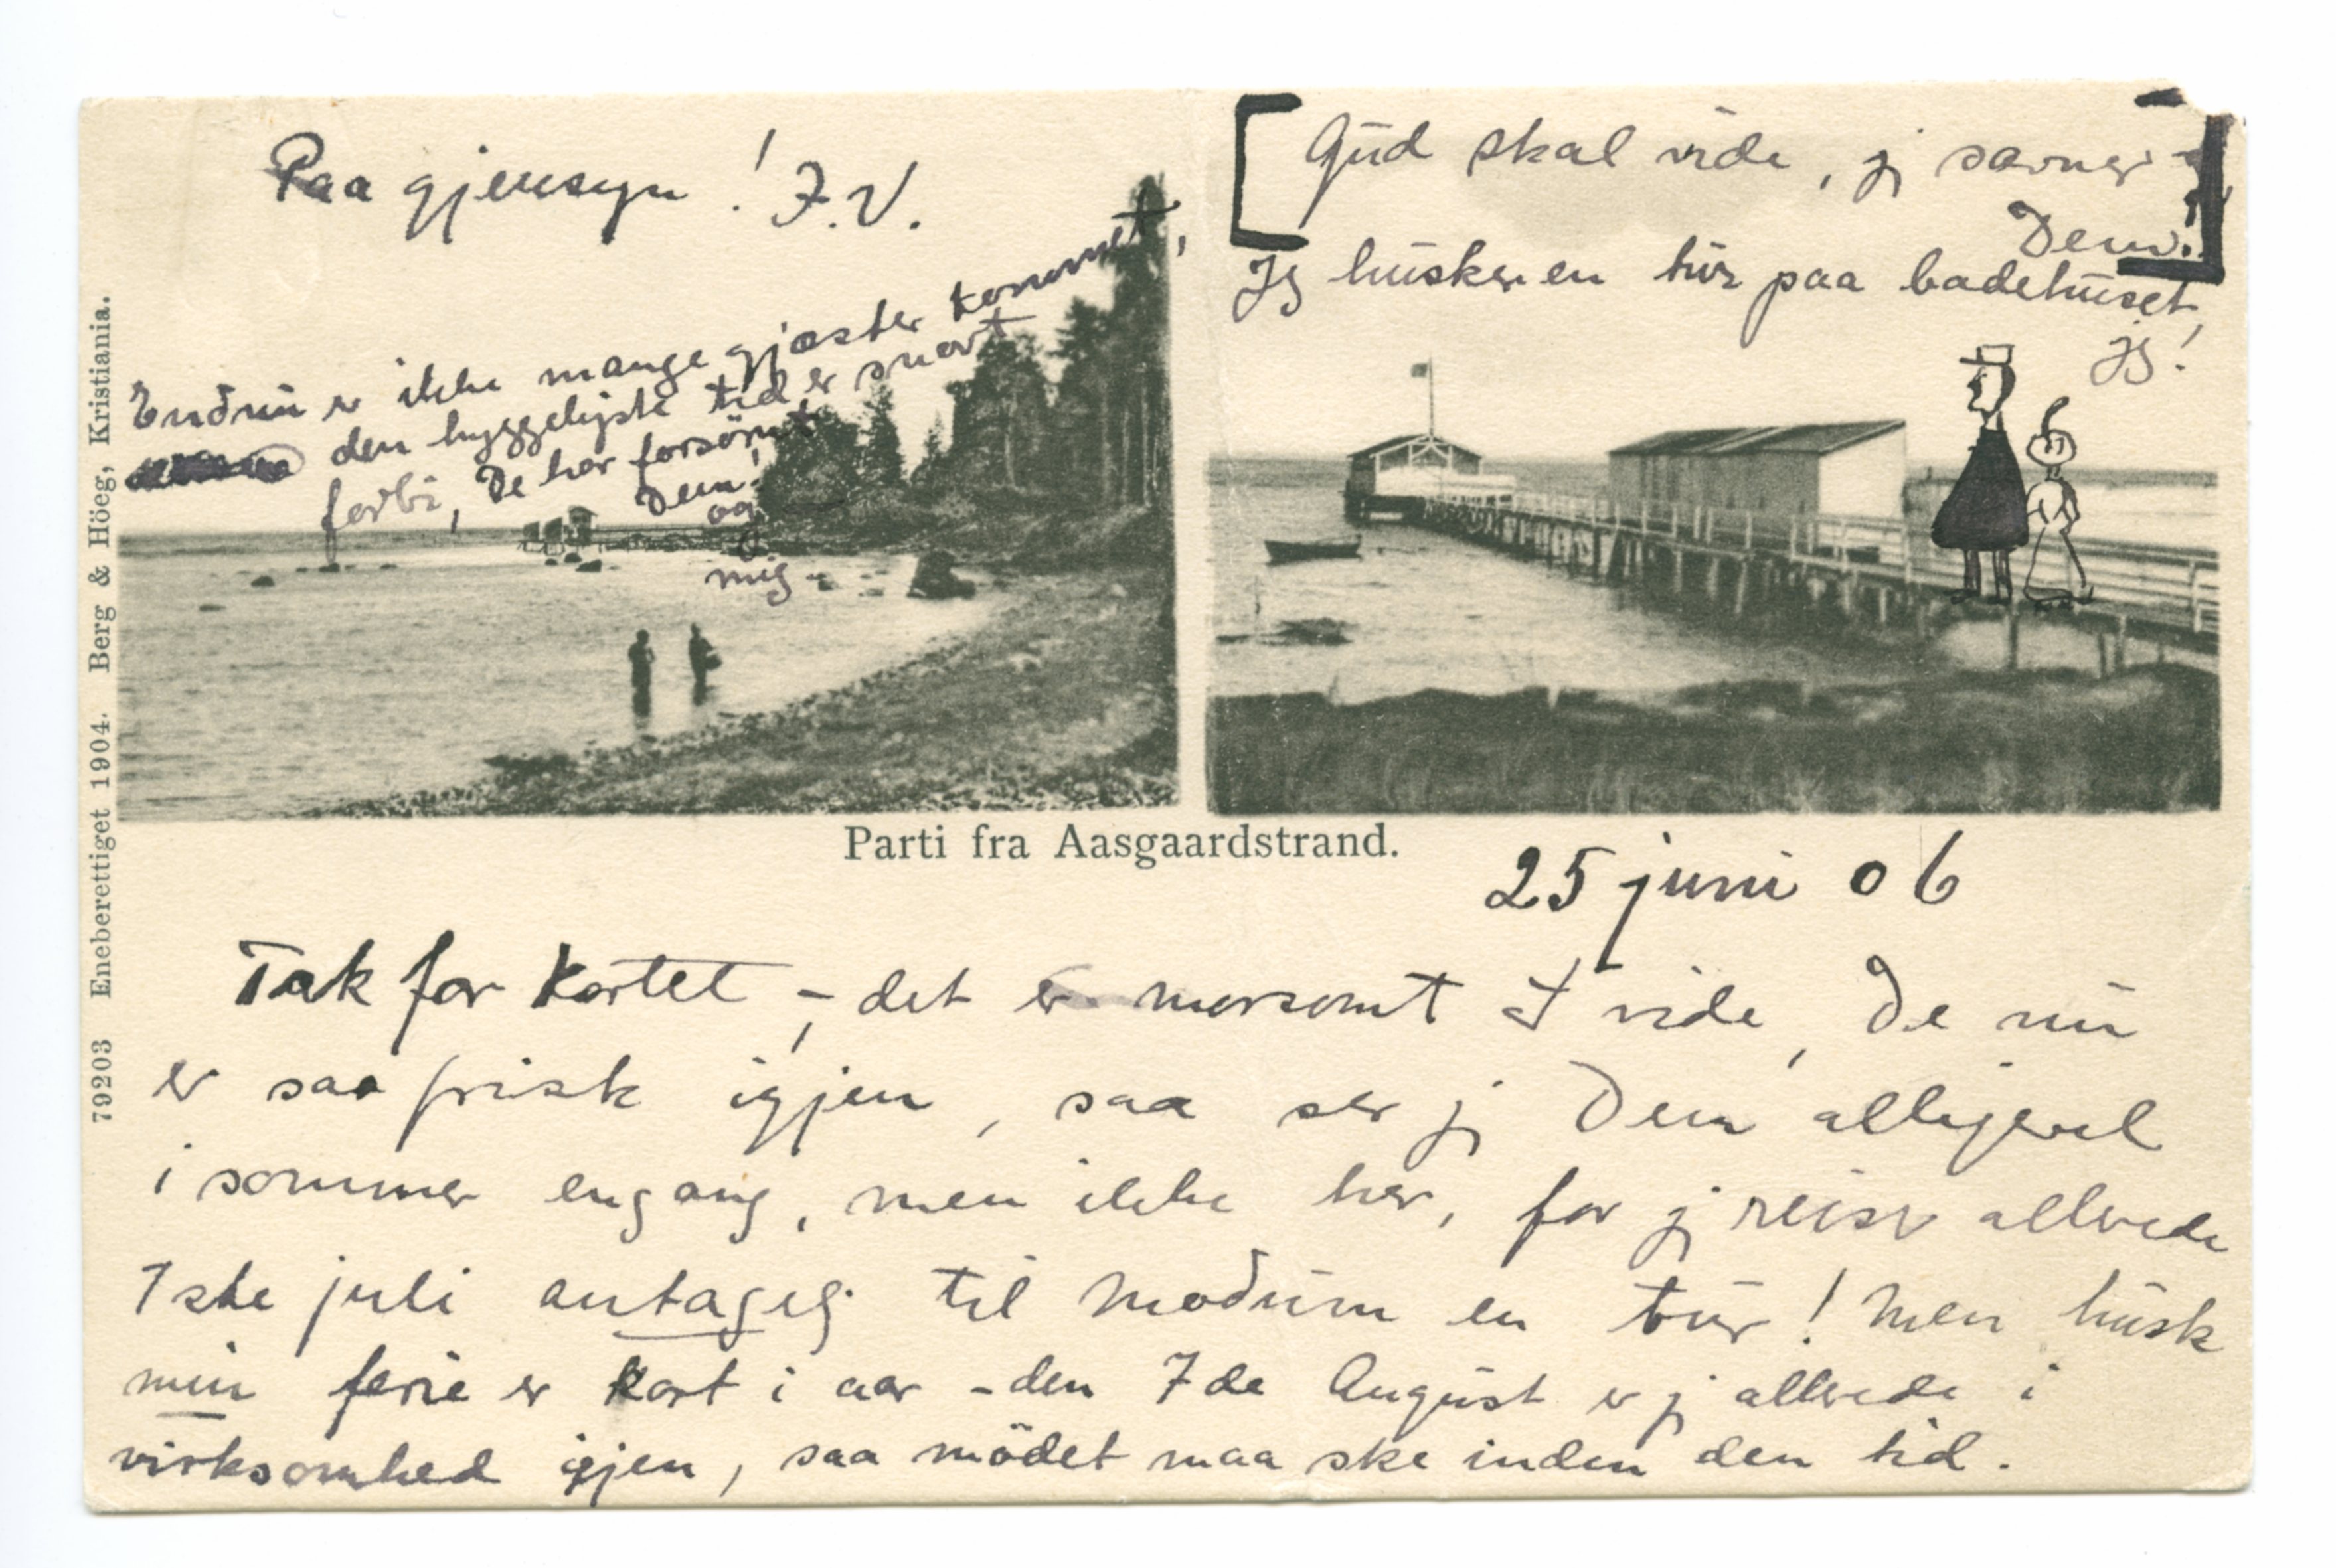 A postcard from Ingse Vibe to Edvard Munch from 25th June 1906. The picture displays a beach scene with two people walking in the shallow water and a pier with a boat house at the end. The postcard is written and drawn on.